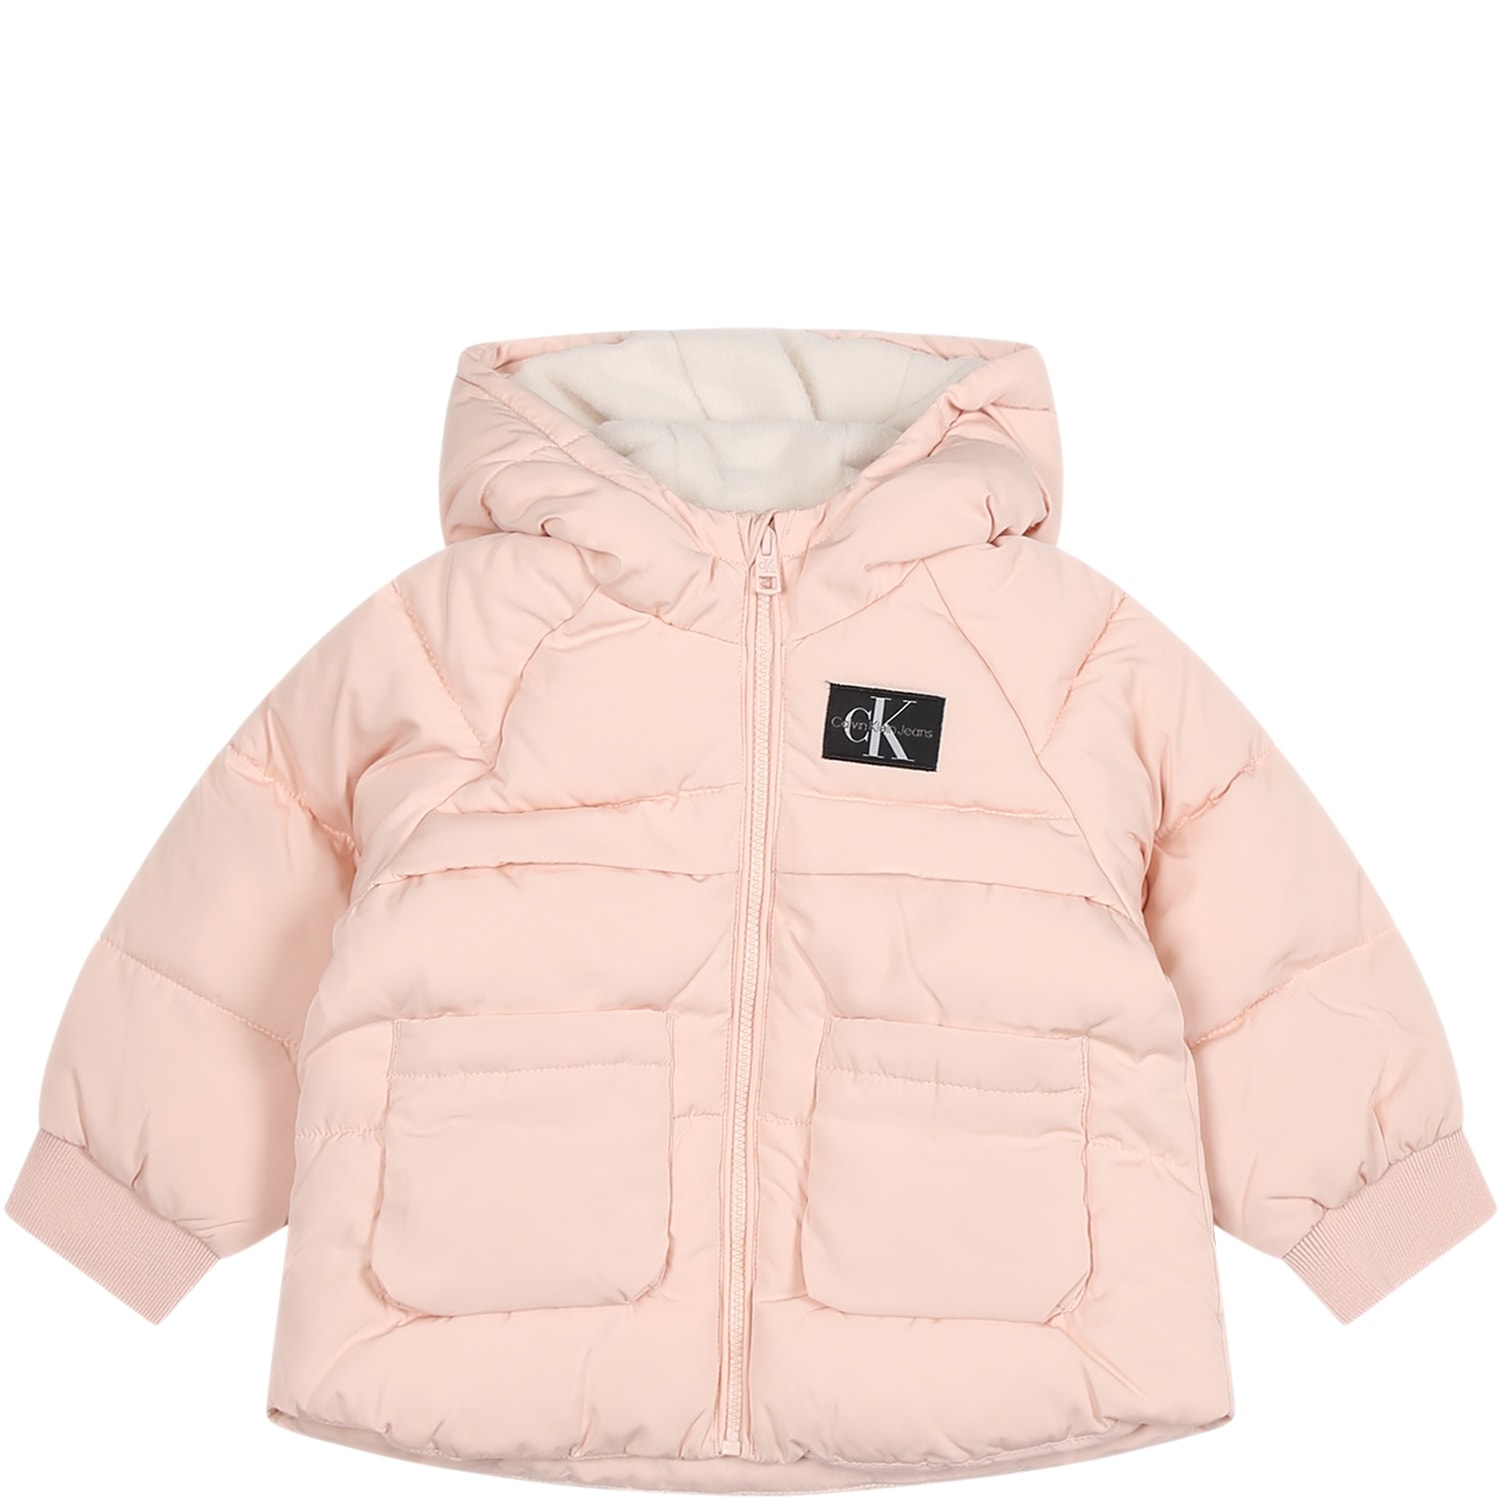 CALVIN KLEIN PINK DOWN JACKET FOR BABY GIRL WITH LOGO